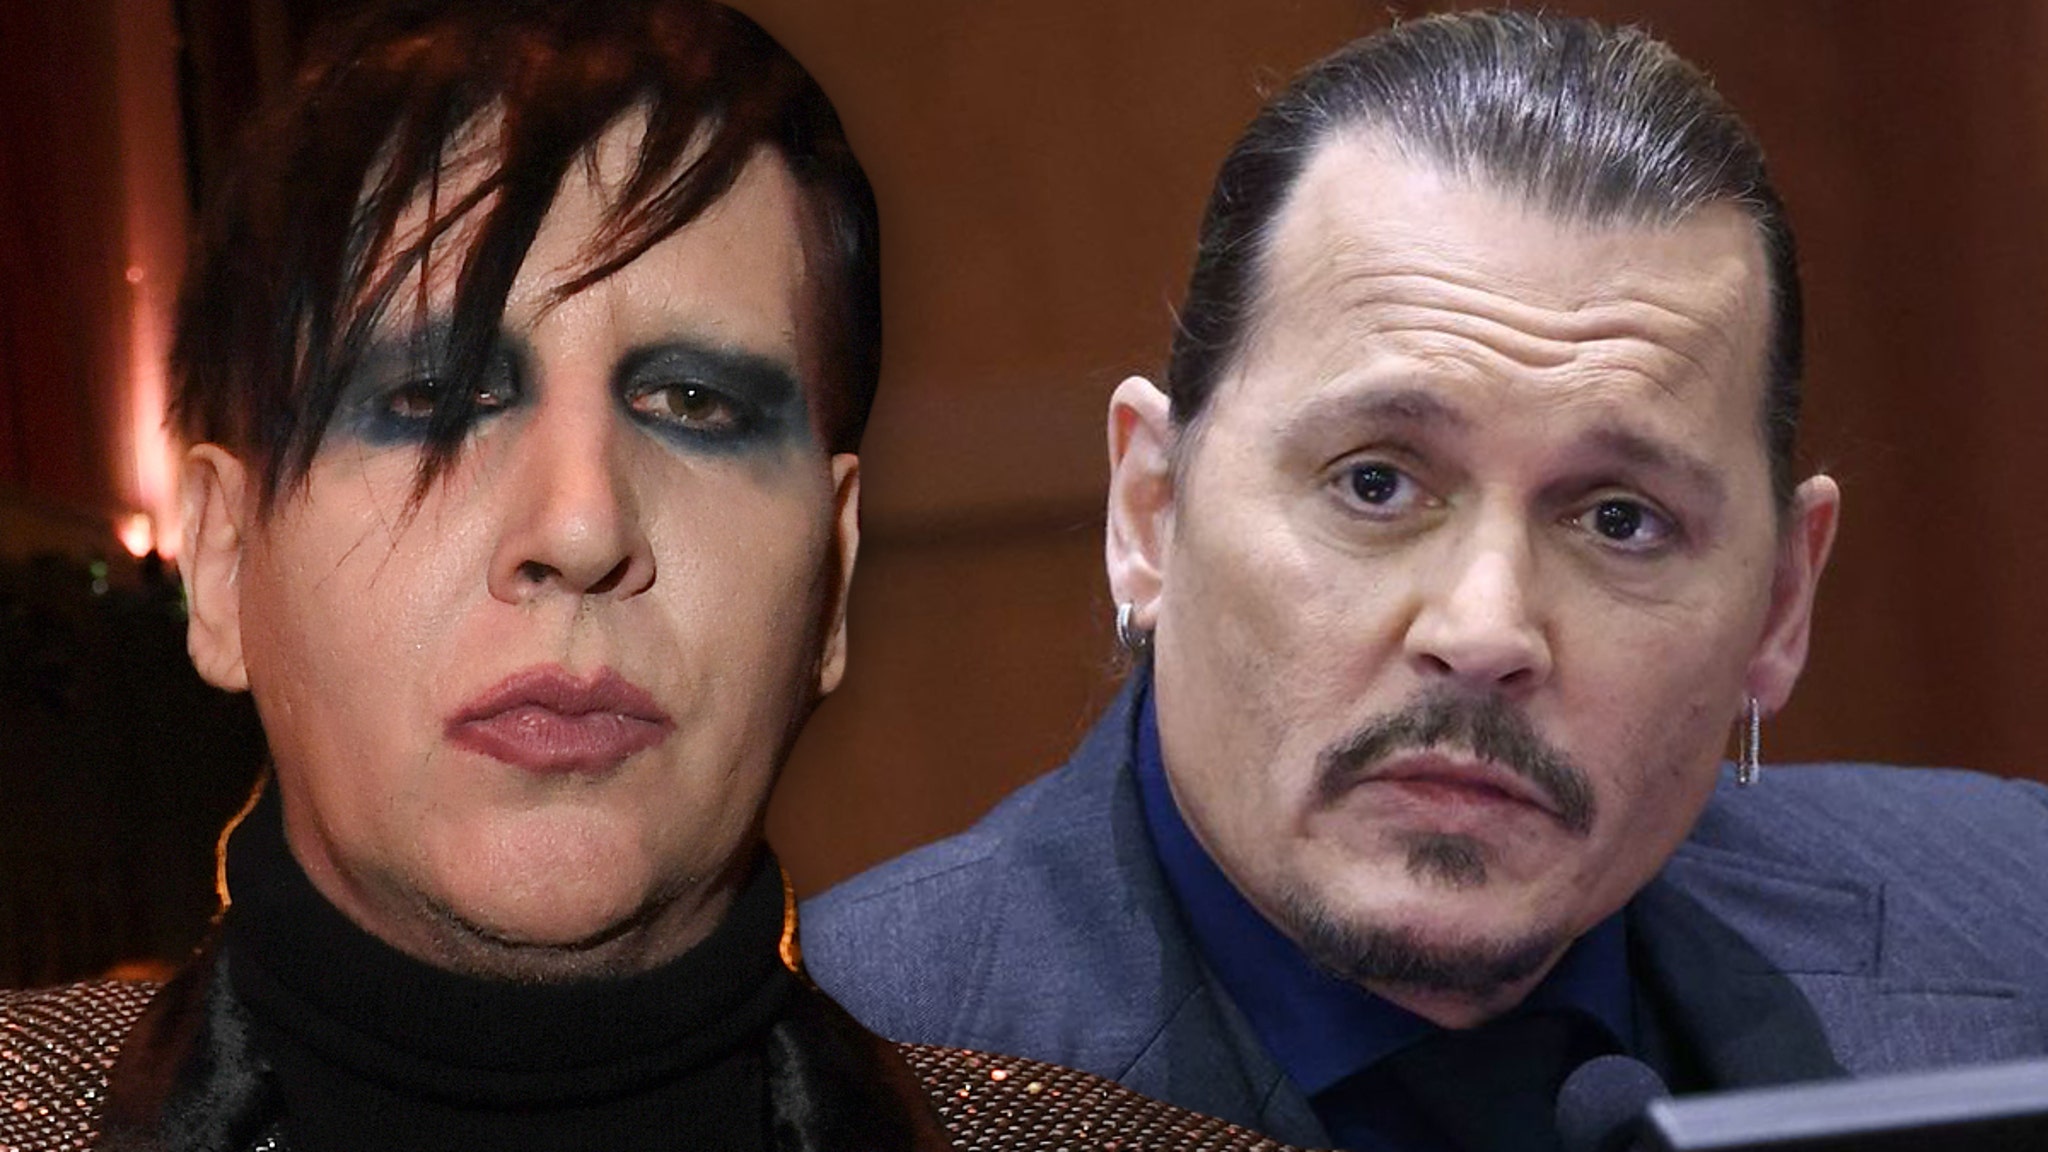 Marilyn Manson Situation In contrast to Johnny Depp’s Amid Viral Thread